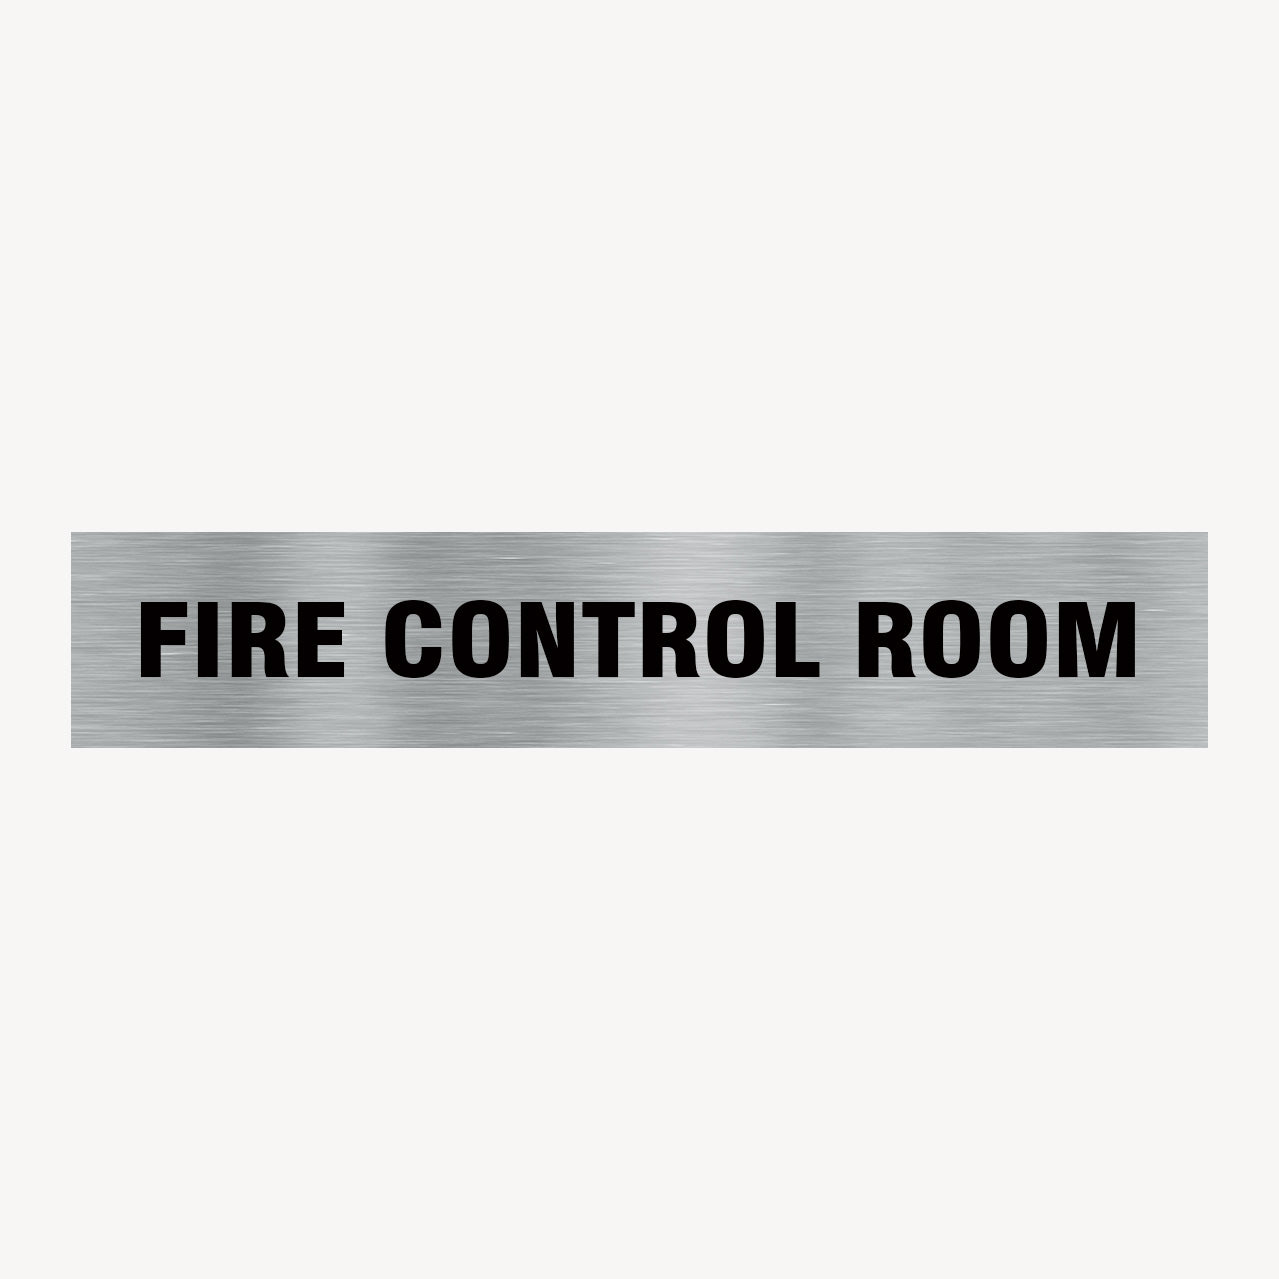 FIRE CONTROL ROOM SIGN - STATUTORY SIGNS - ONLINE SHOP